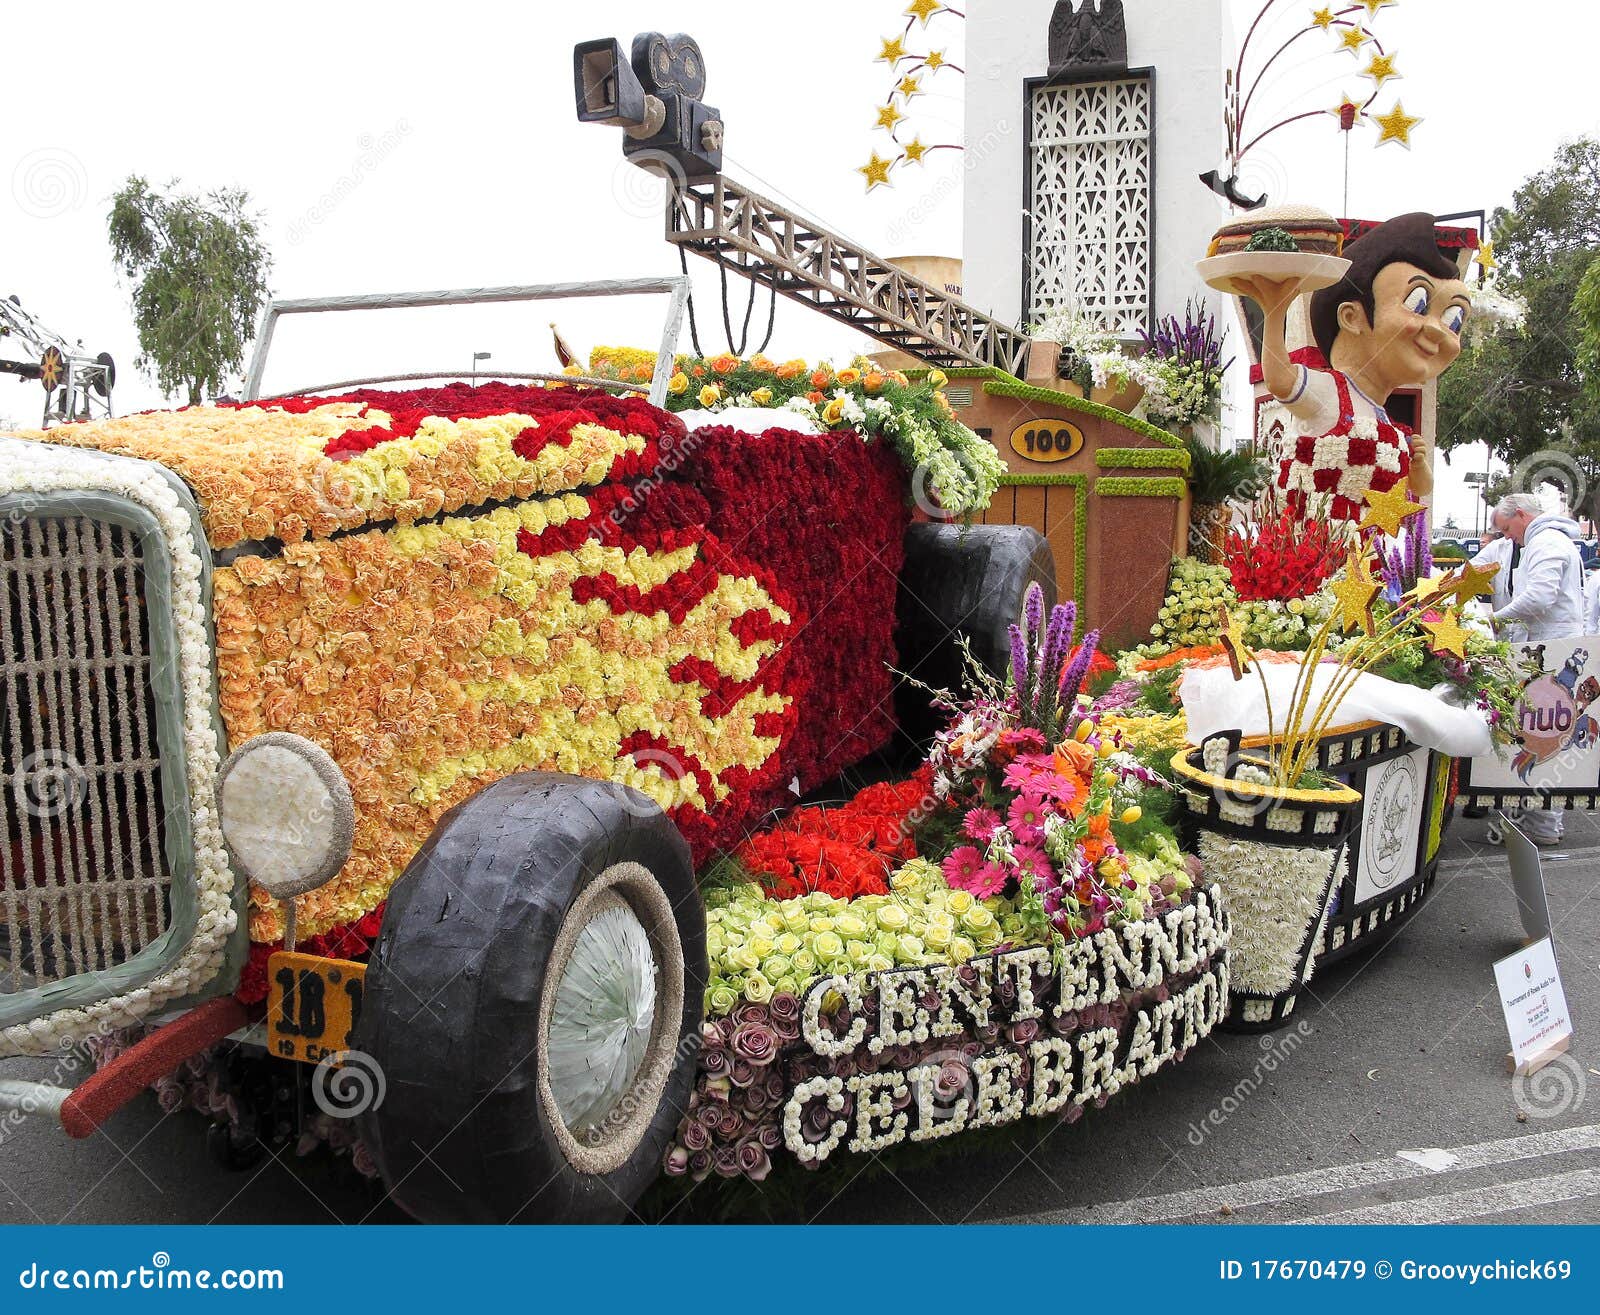 the-city-of-burbank-s-2011-rose-bowl-parade-float-editorial-stock-image